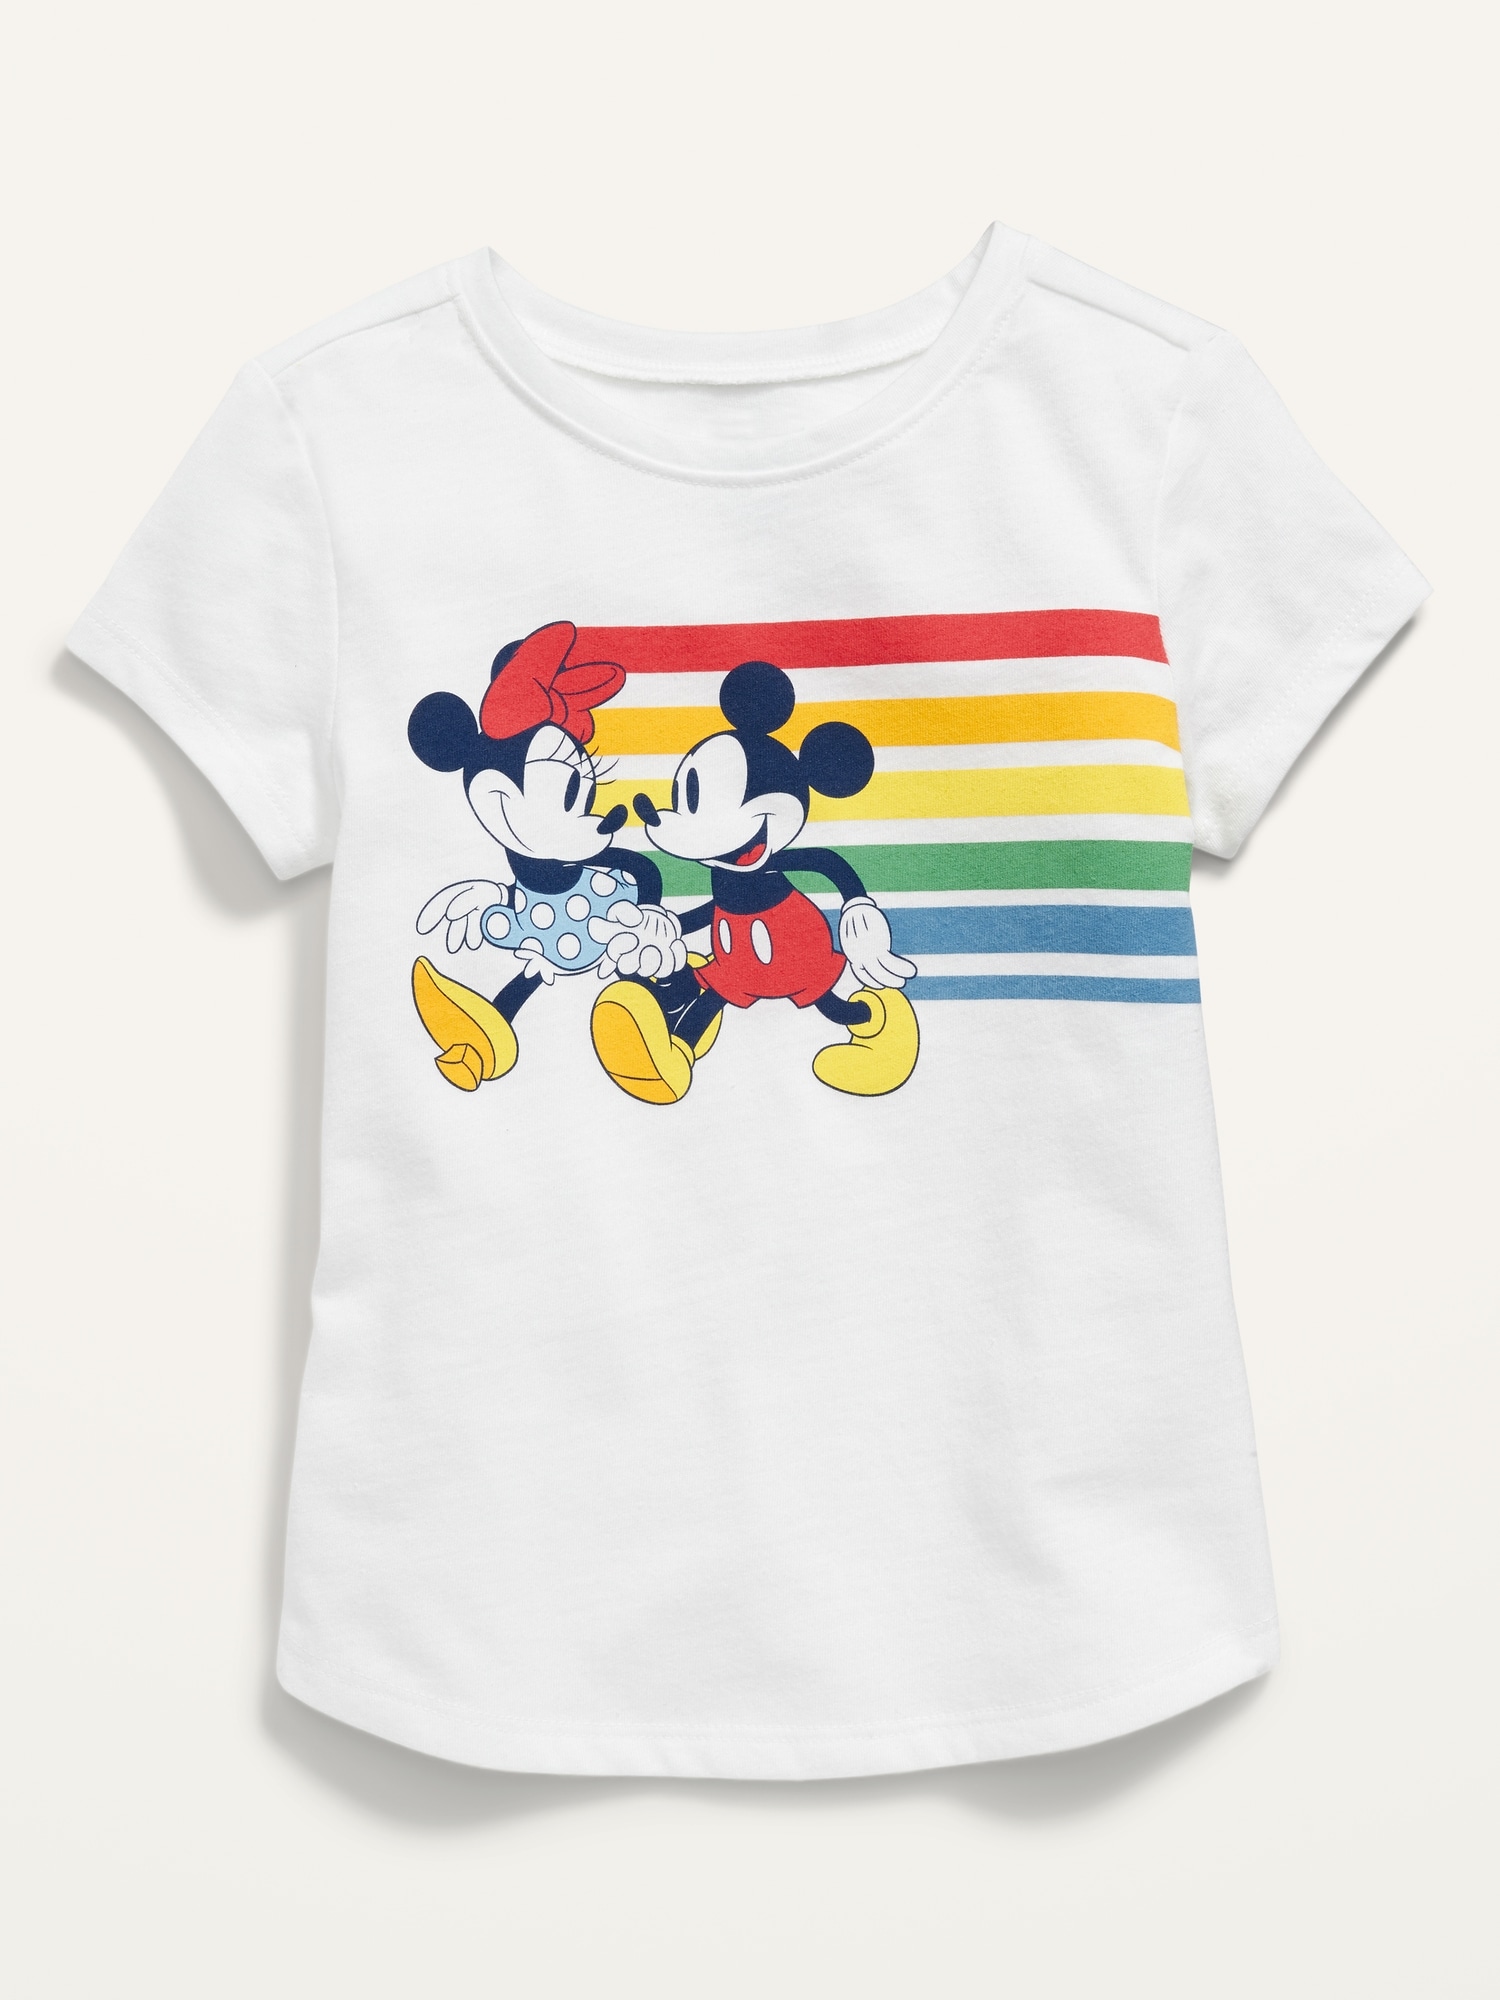 Unisex Disney© Minnie and Mickey Mouse™ Graphic Tee for Toddler